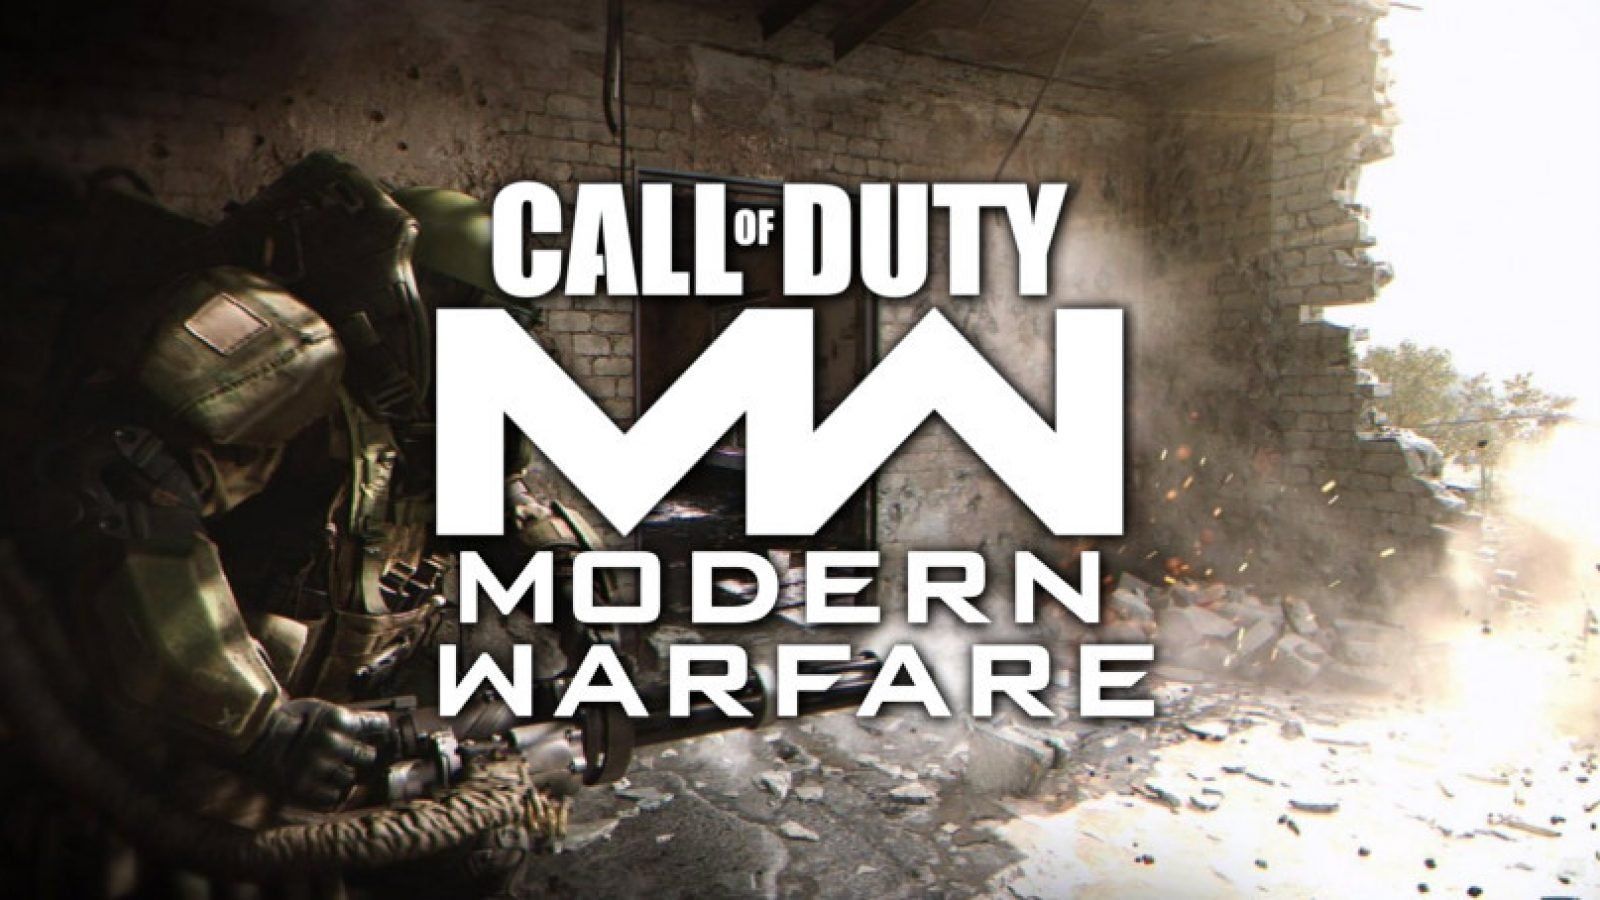 First look at Modern Warfare multiplayer revealed at E3